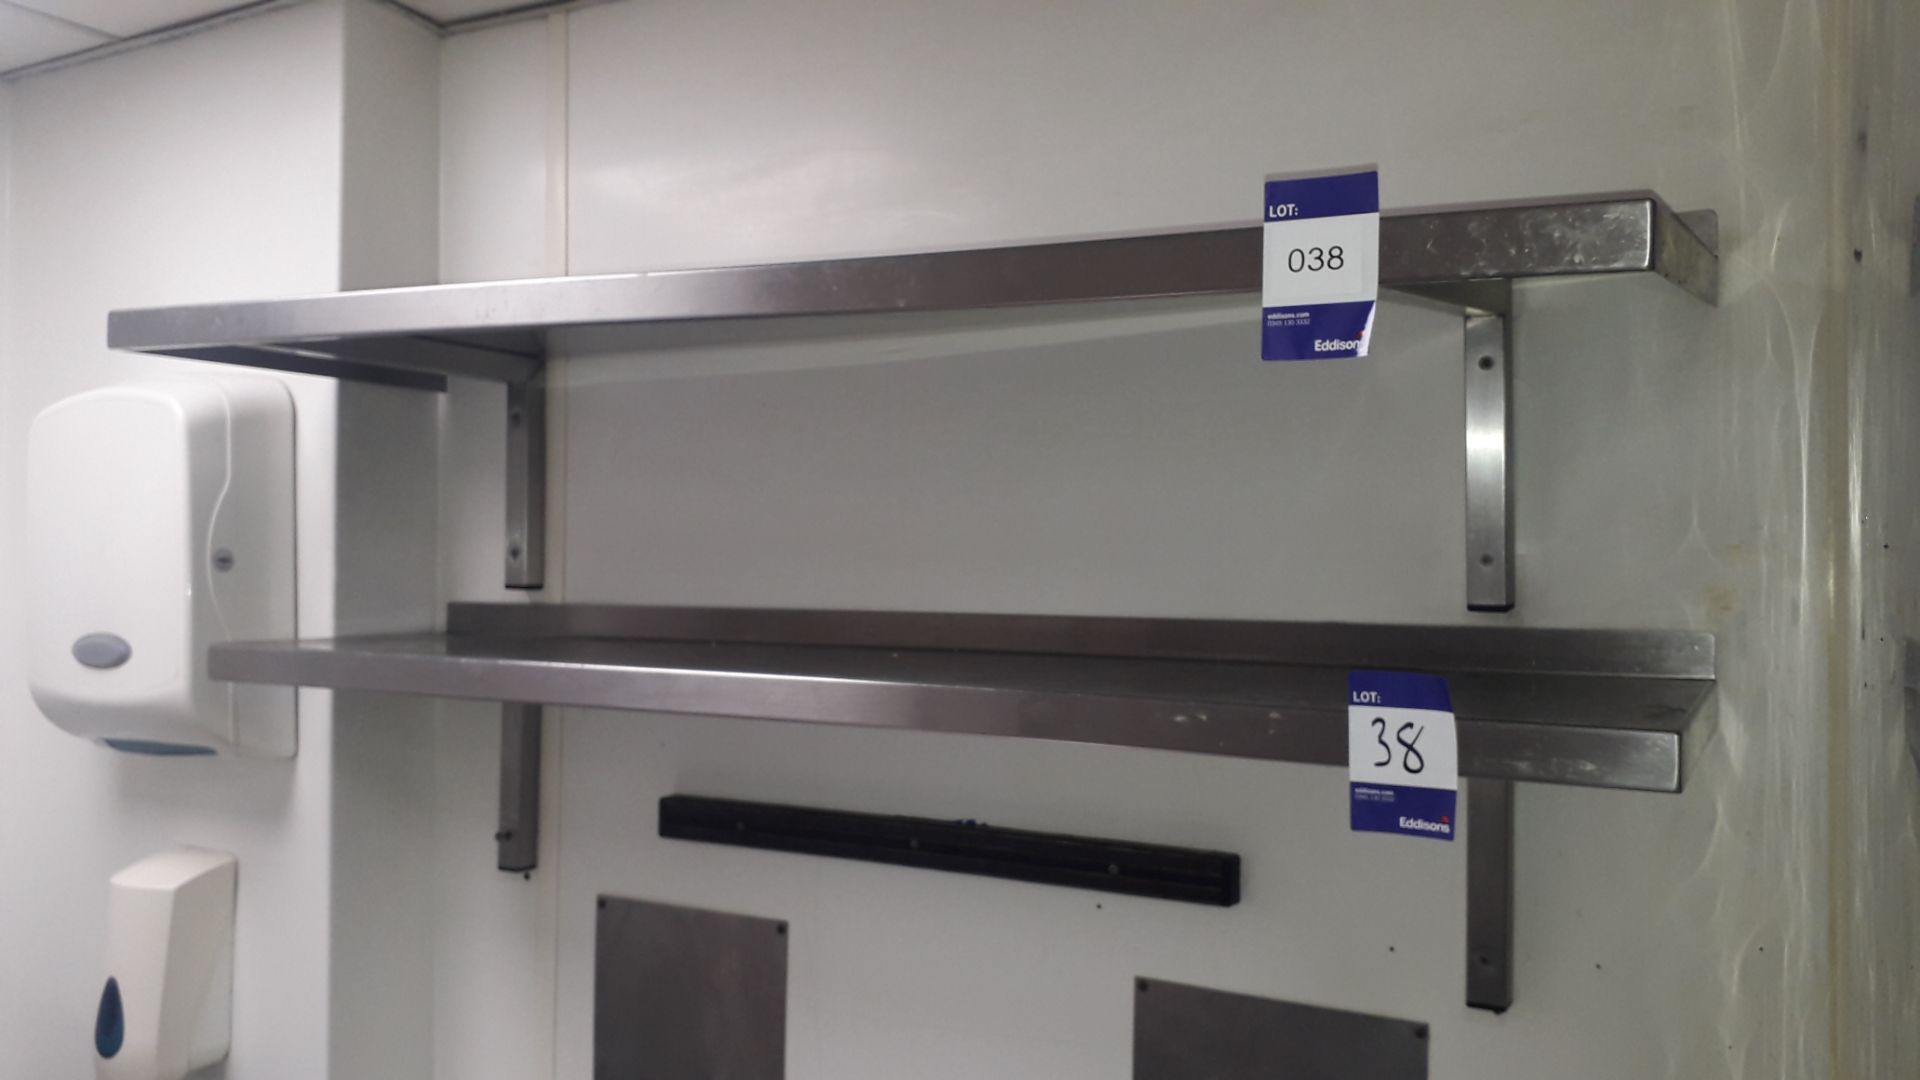 3 x Stainless steel wall mounted Shelves (2 x 1,300mm & 1 x 1,400mm)